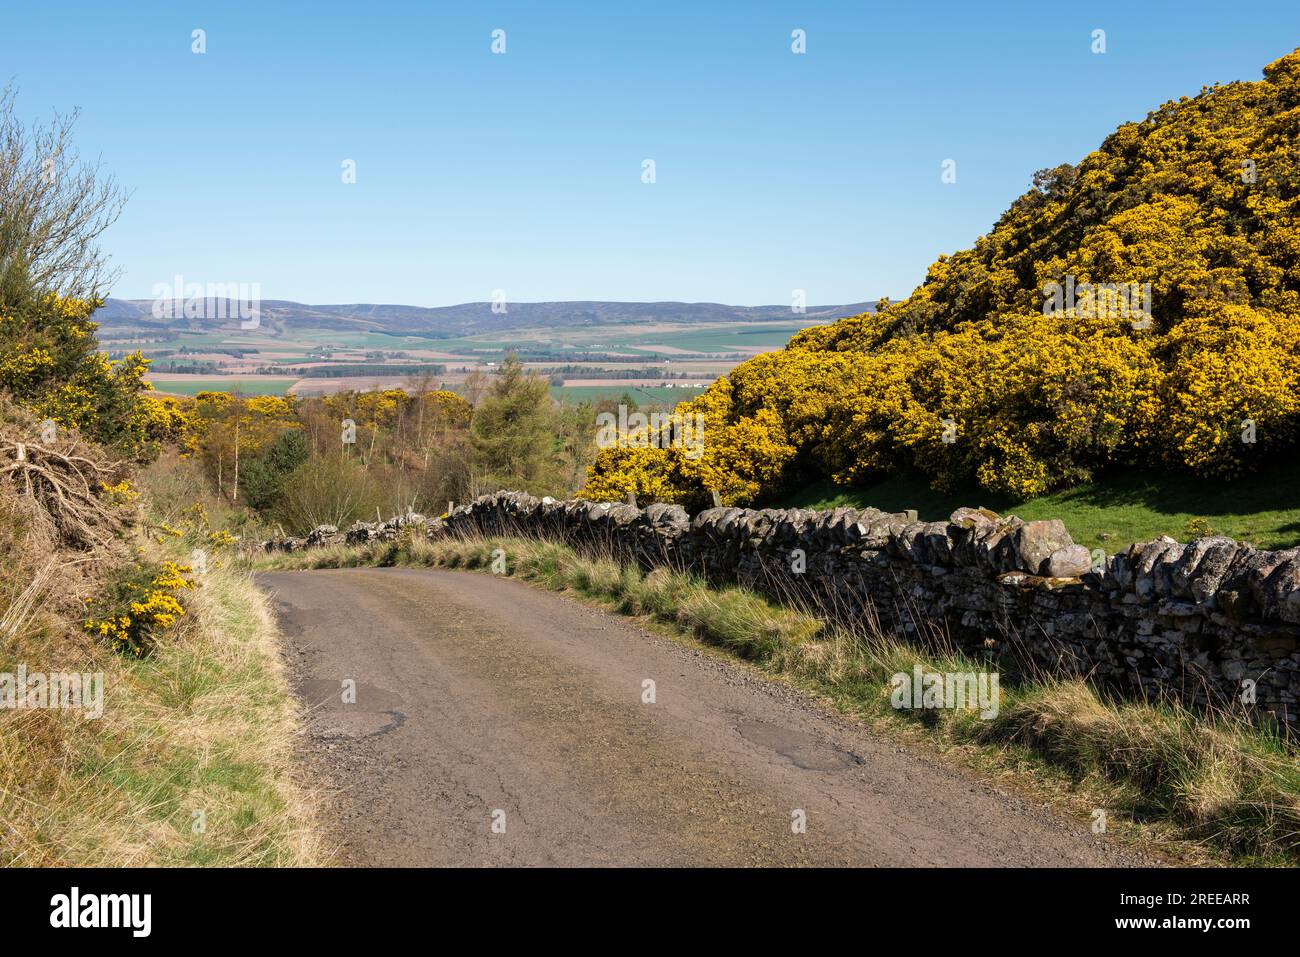 Views over to the Angus Glens from the single track road fringed with yellow broom passing over Finavon Hill, Angus, Scotland. Stock Photo